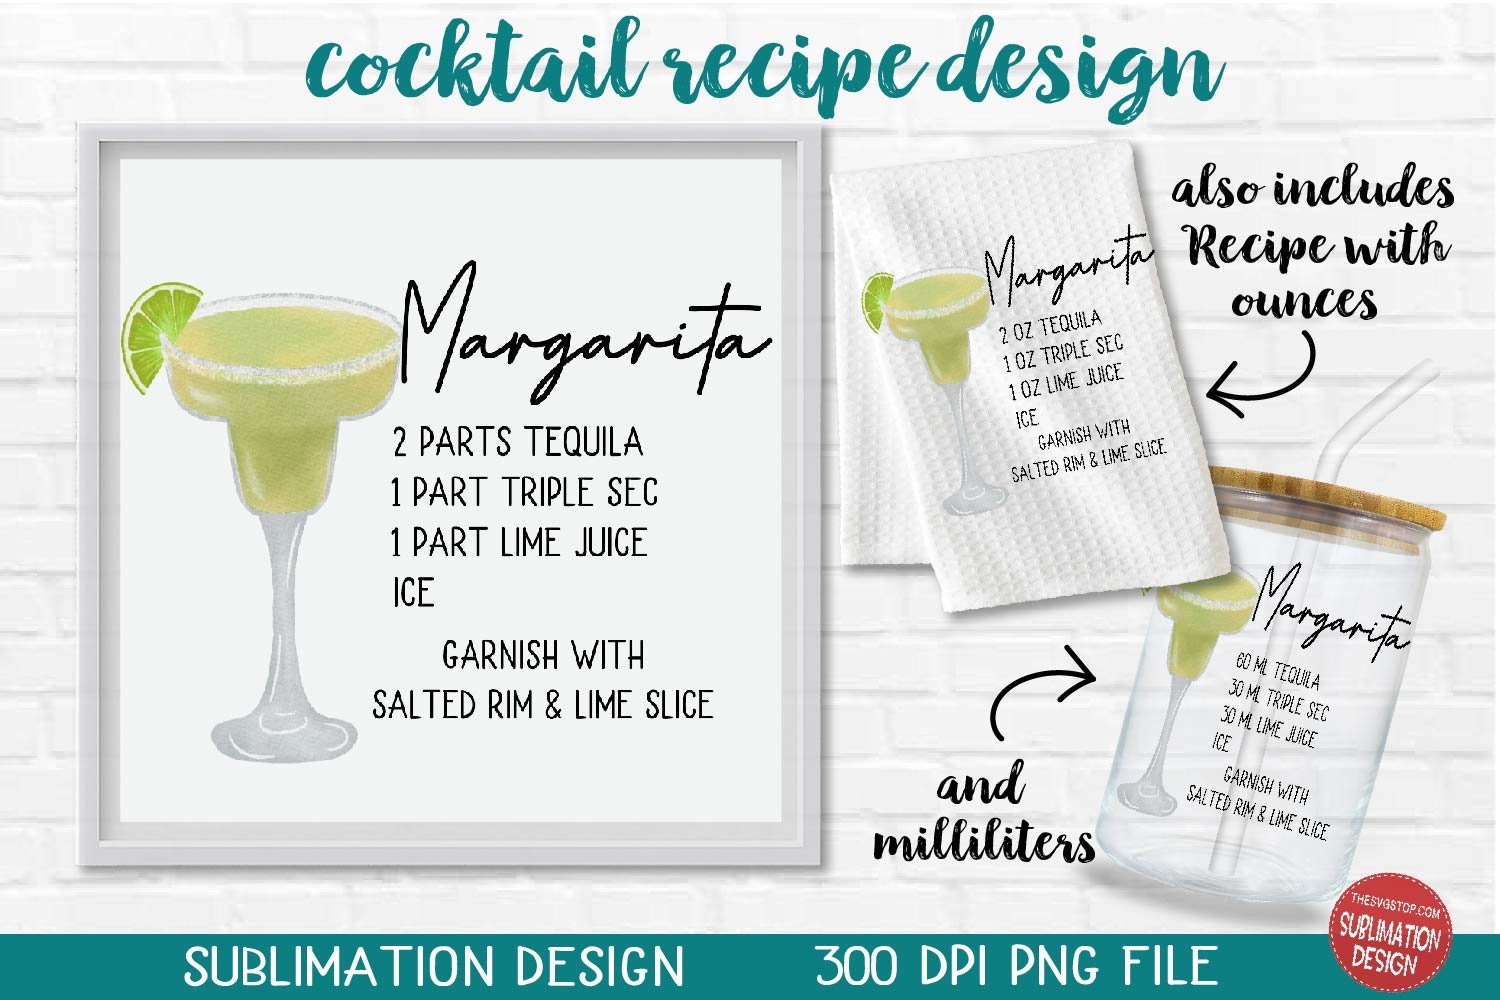 Cocktail Recipe Re-fill Cards – Inklings Paperie